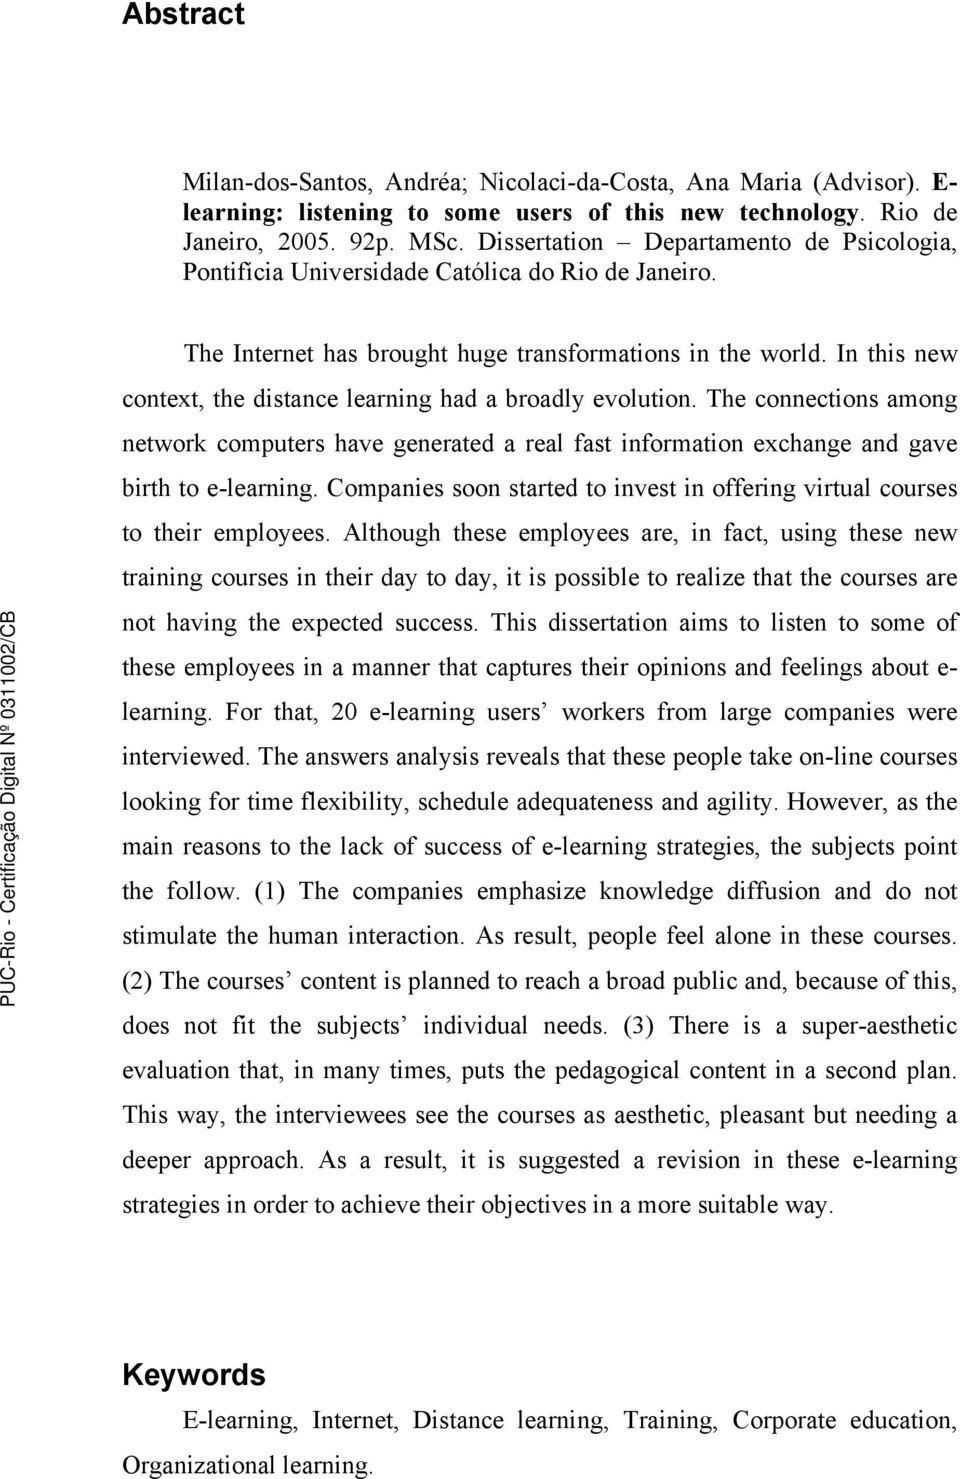 In this new context, the distance learning had a broadly evolution. The connections among network computers have generated a real fast information exchange and gave birth to e-learning.